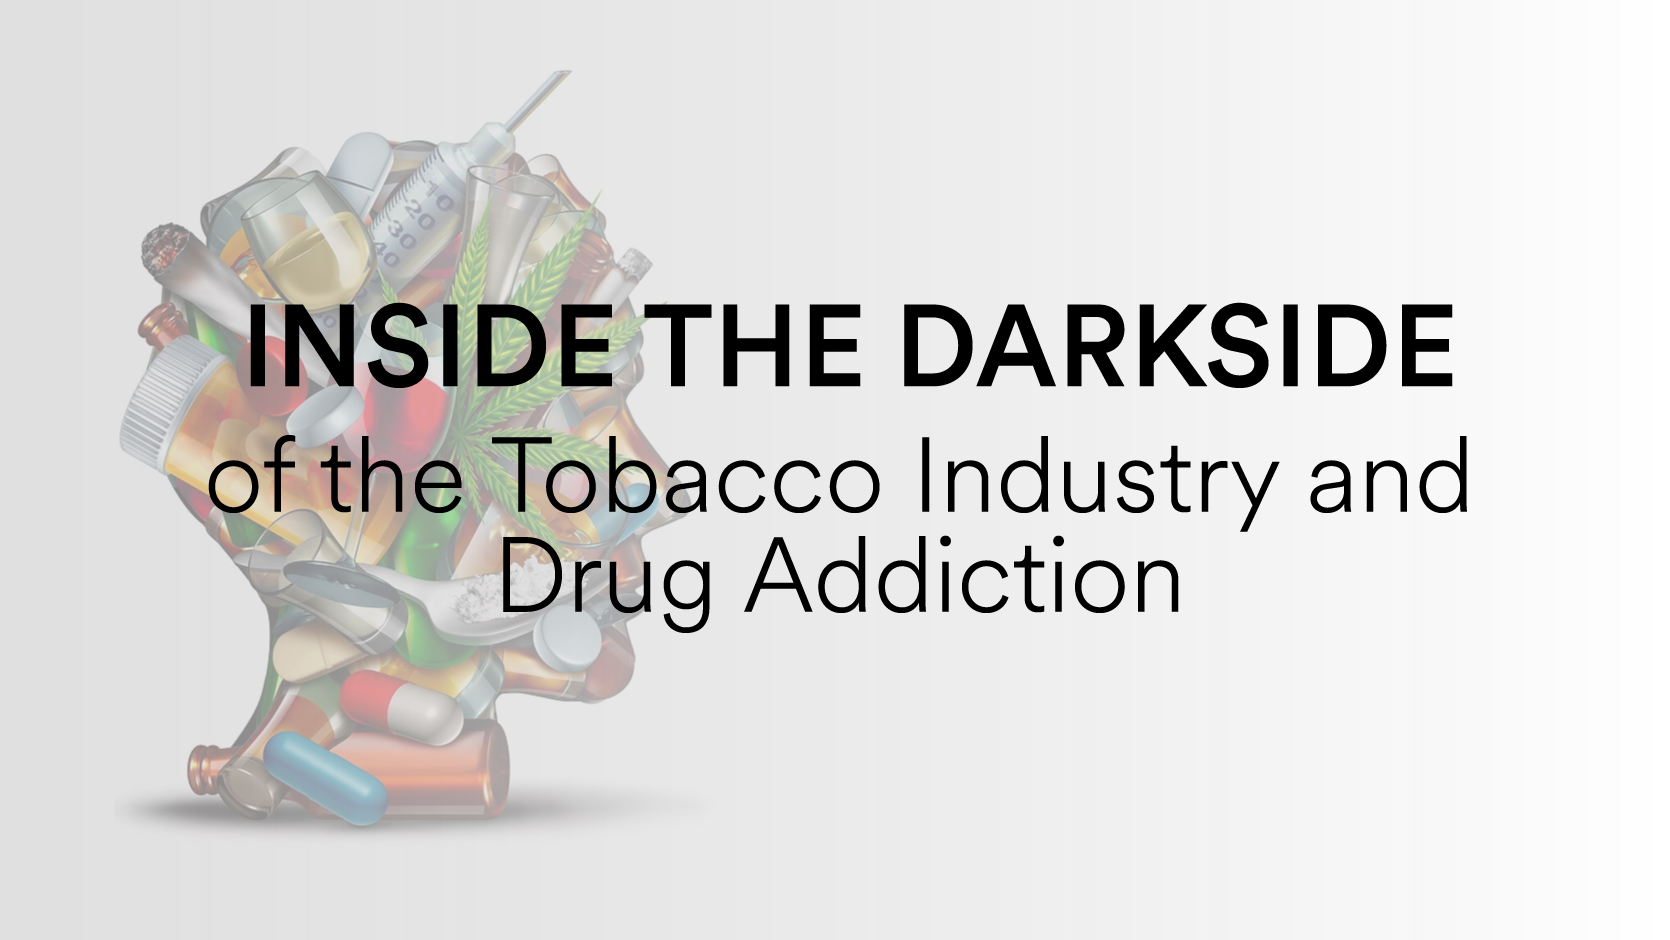 Darkside of the tobacco industry